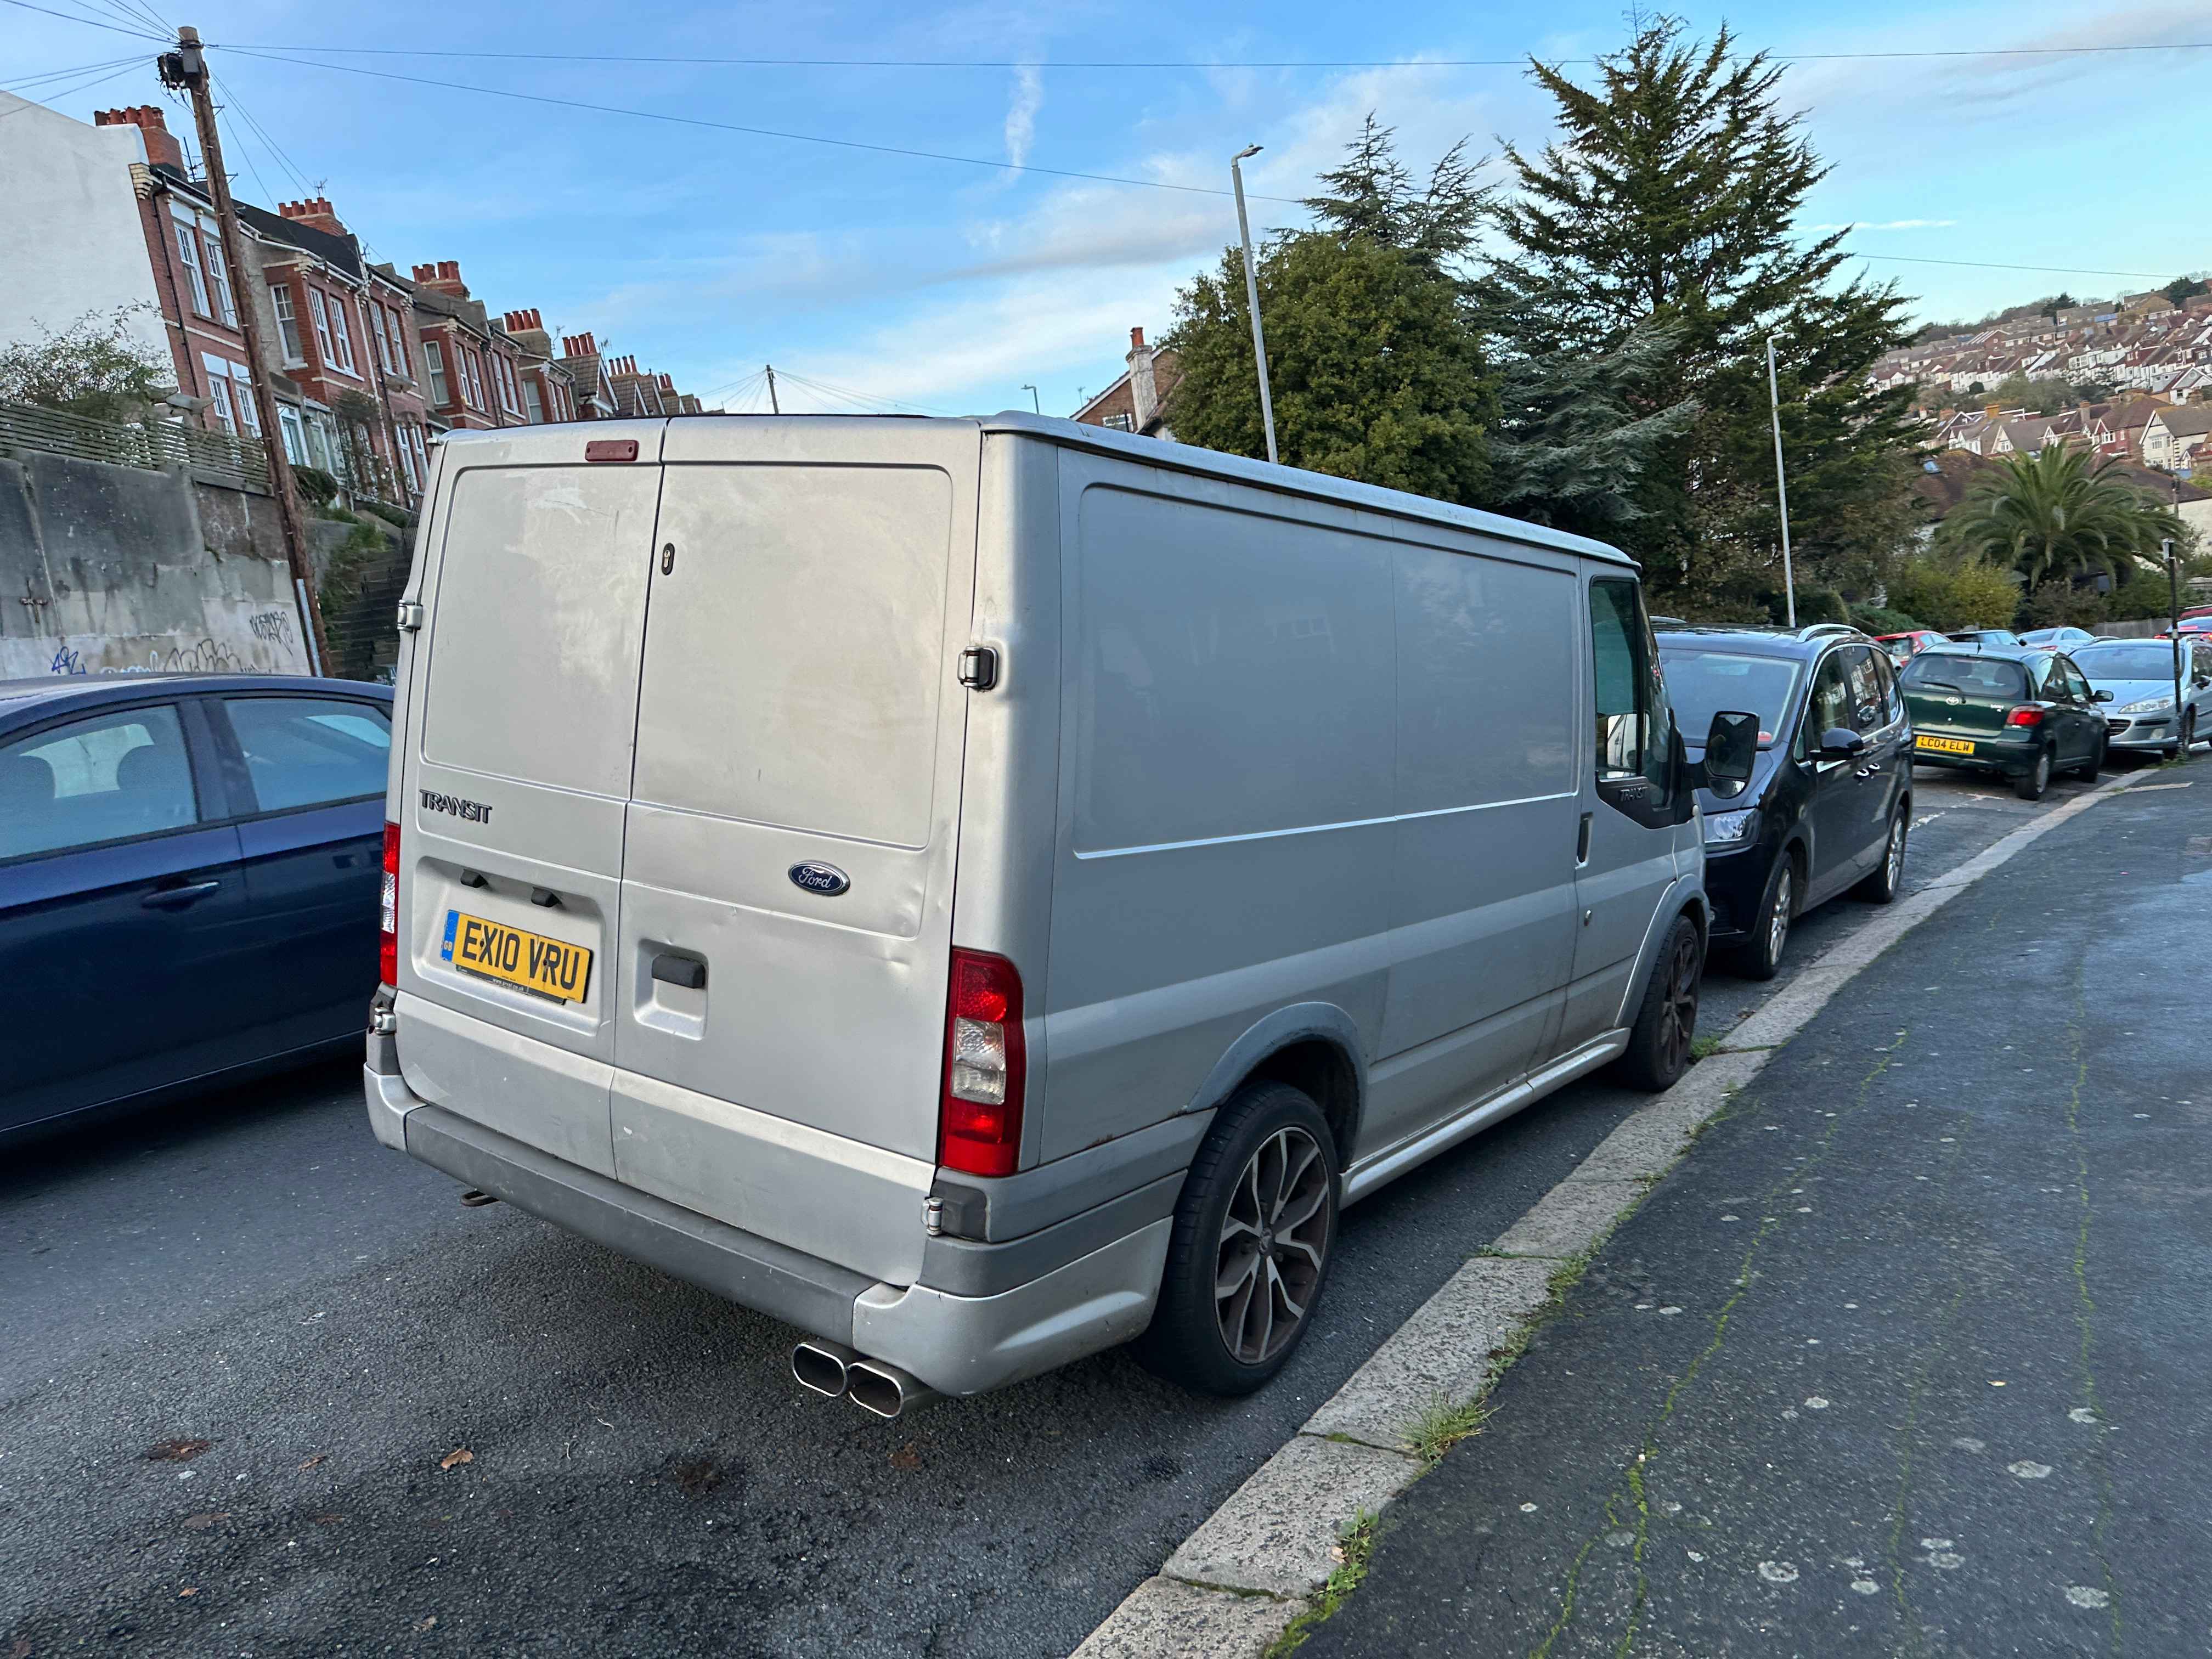 Photograph of EX10 VRU - a Silver Ford Transit parked in Hollingdean by a non-resident. The sixth of ten photographs supplied by the residents of Hollingdean.